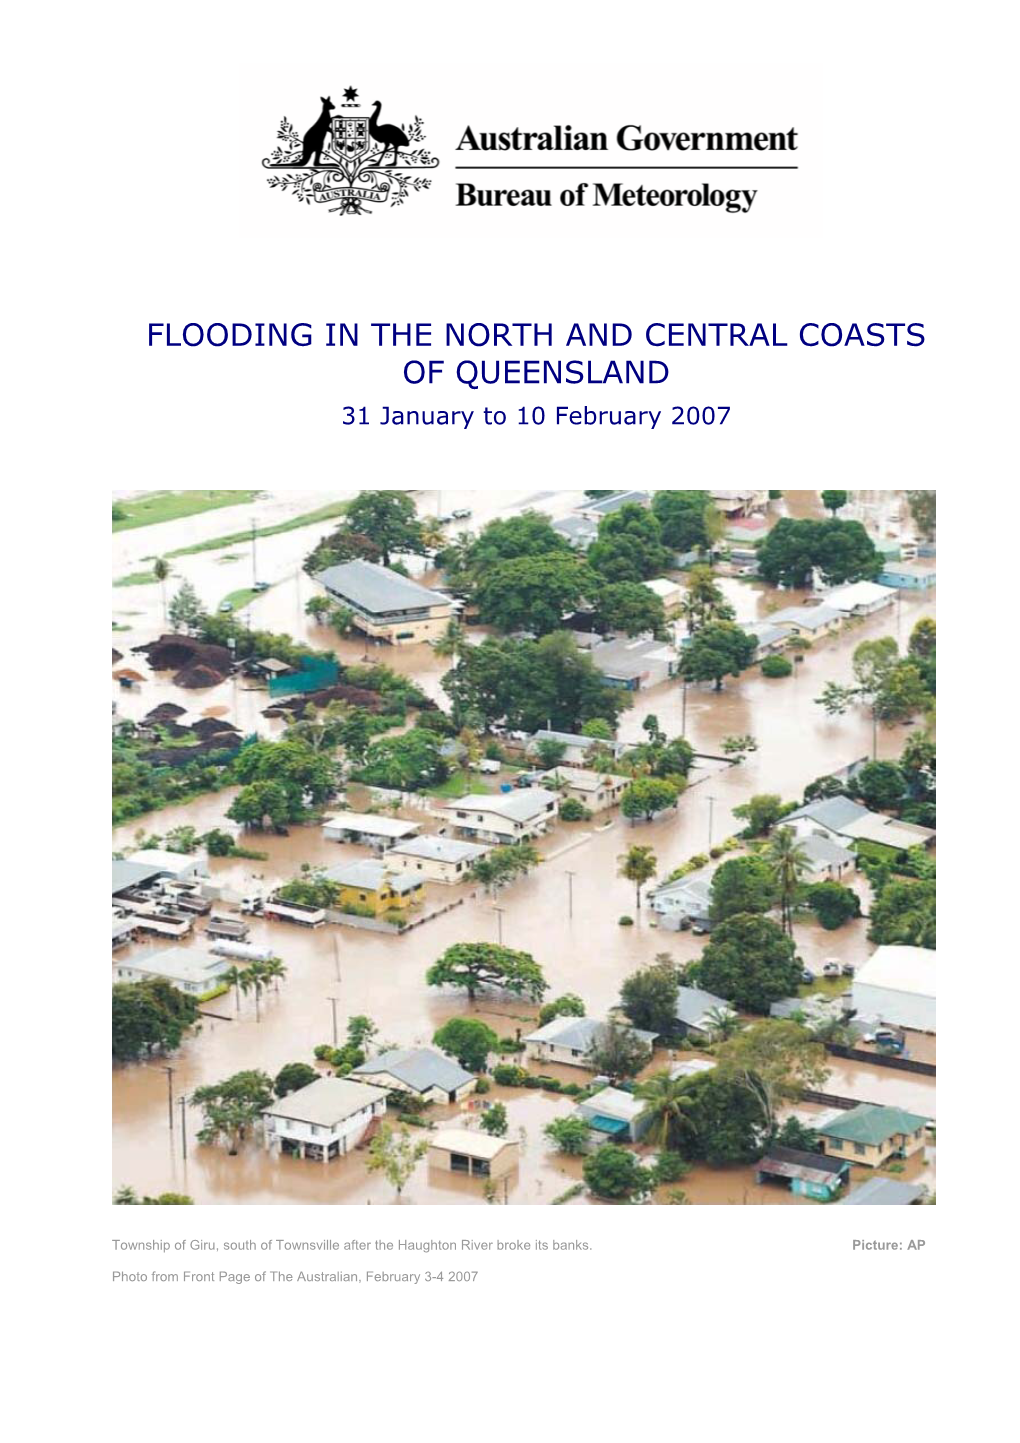 FLOODING in the NORTH and CENTRAL COASTS of QUEENSLAND 31 January to 10 February 2007